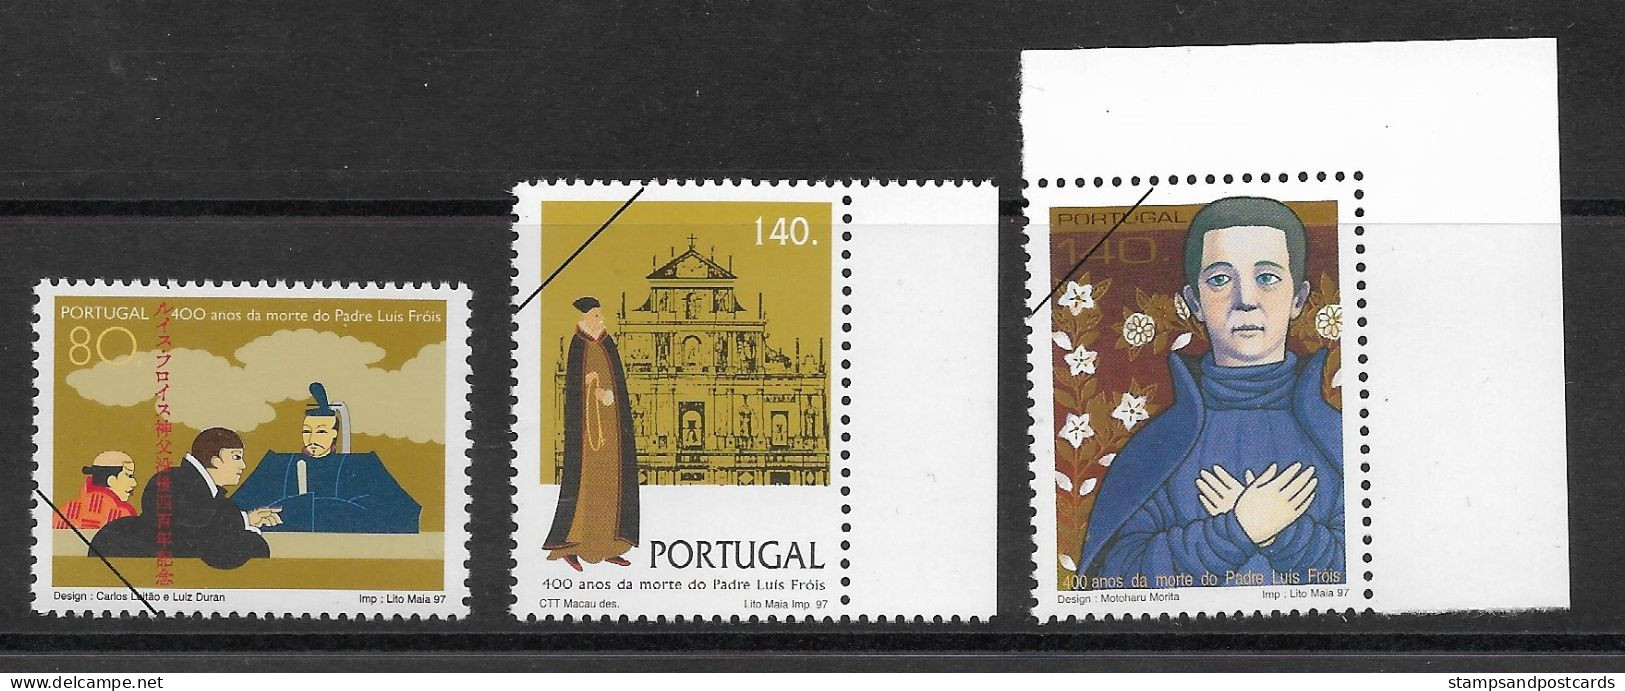 Portugal 1997 SPECIMEN Pére Luis Frois émission Commune Avec Macau Father Frois Joint Issue With Macao - Joint Issues